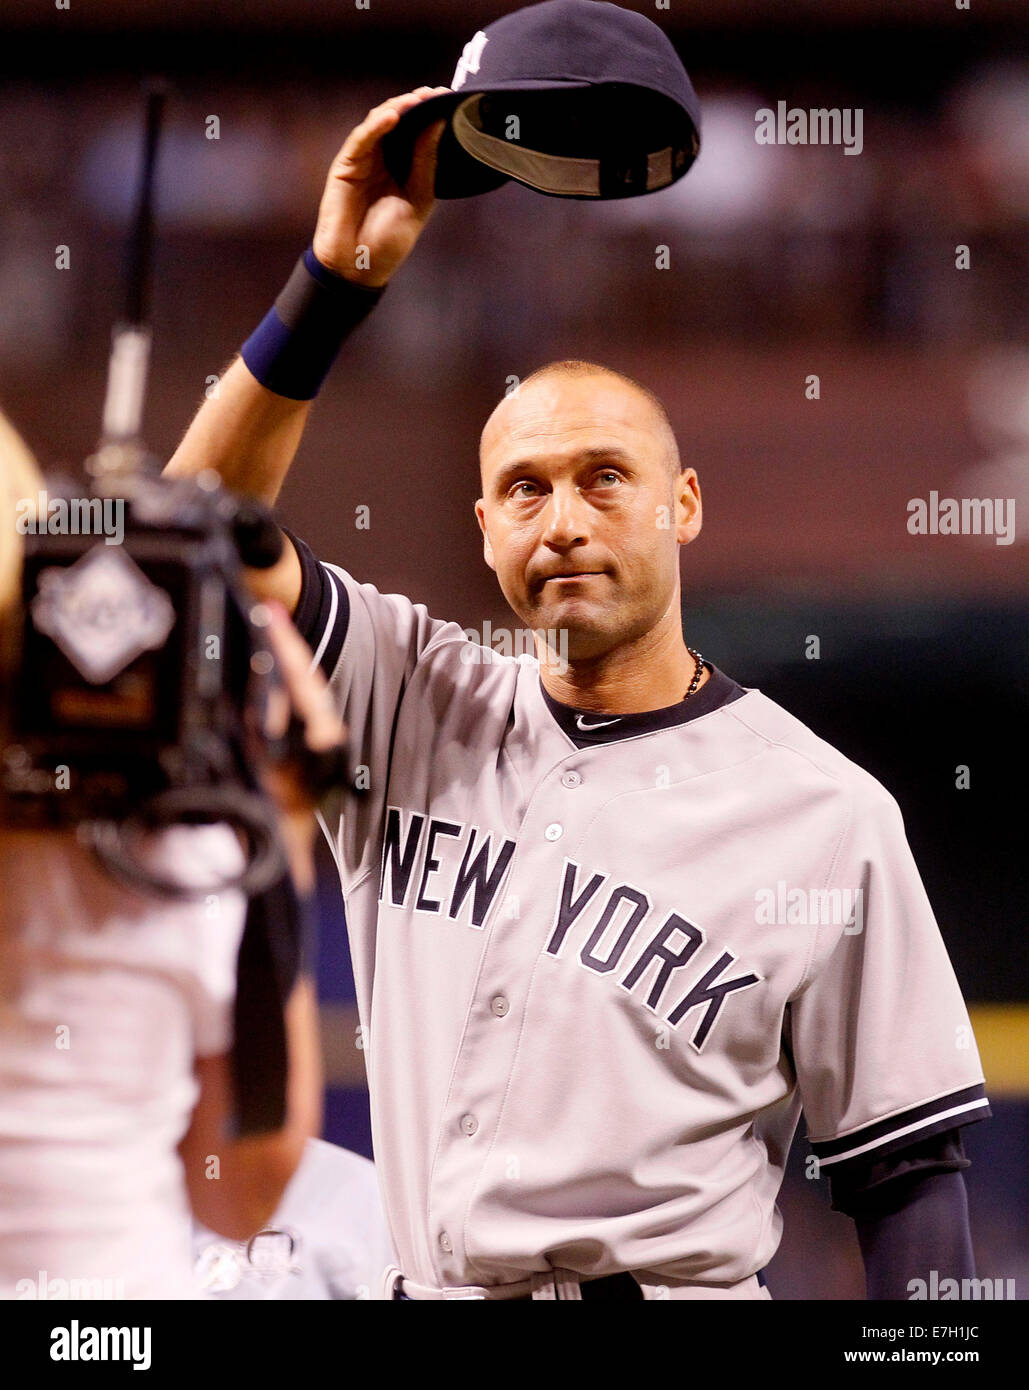 St Ptersburg, Florida, USA. 16th September, 2014.  Retiring New York Yankees SS DEREK JETER (2) raises his cap to salute the crowd as he is honored by the Tampa Bay Rays on the field before the game at Tropicana Field in St. Petersburg. Credit:  ZUMA Press, Inc/Alamy Live News Stock Photo